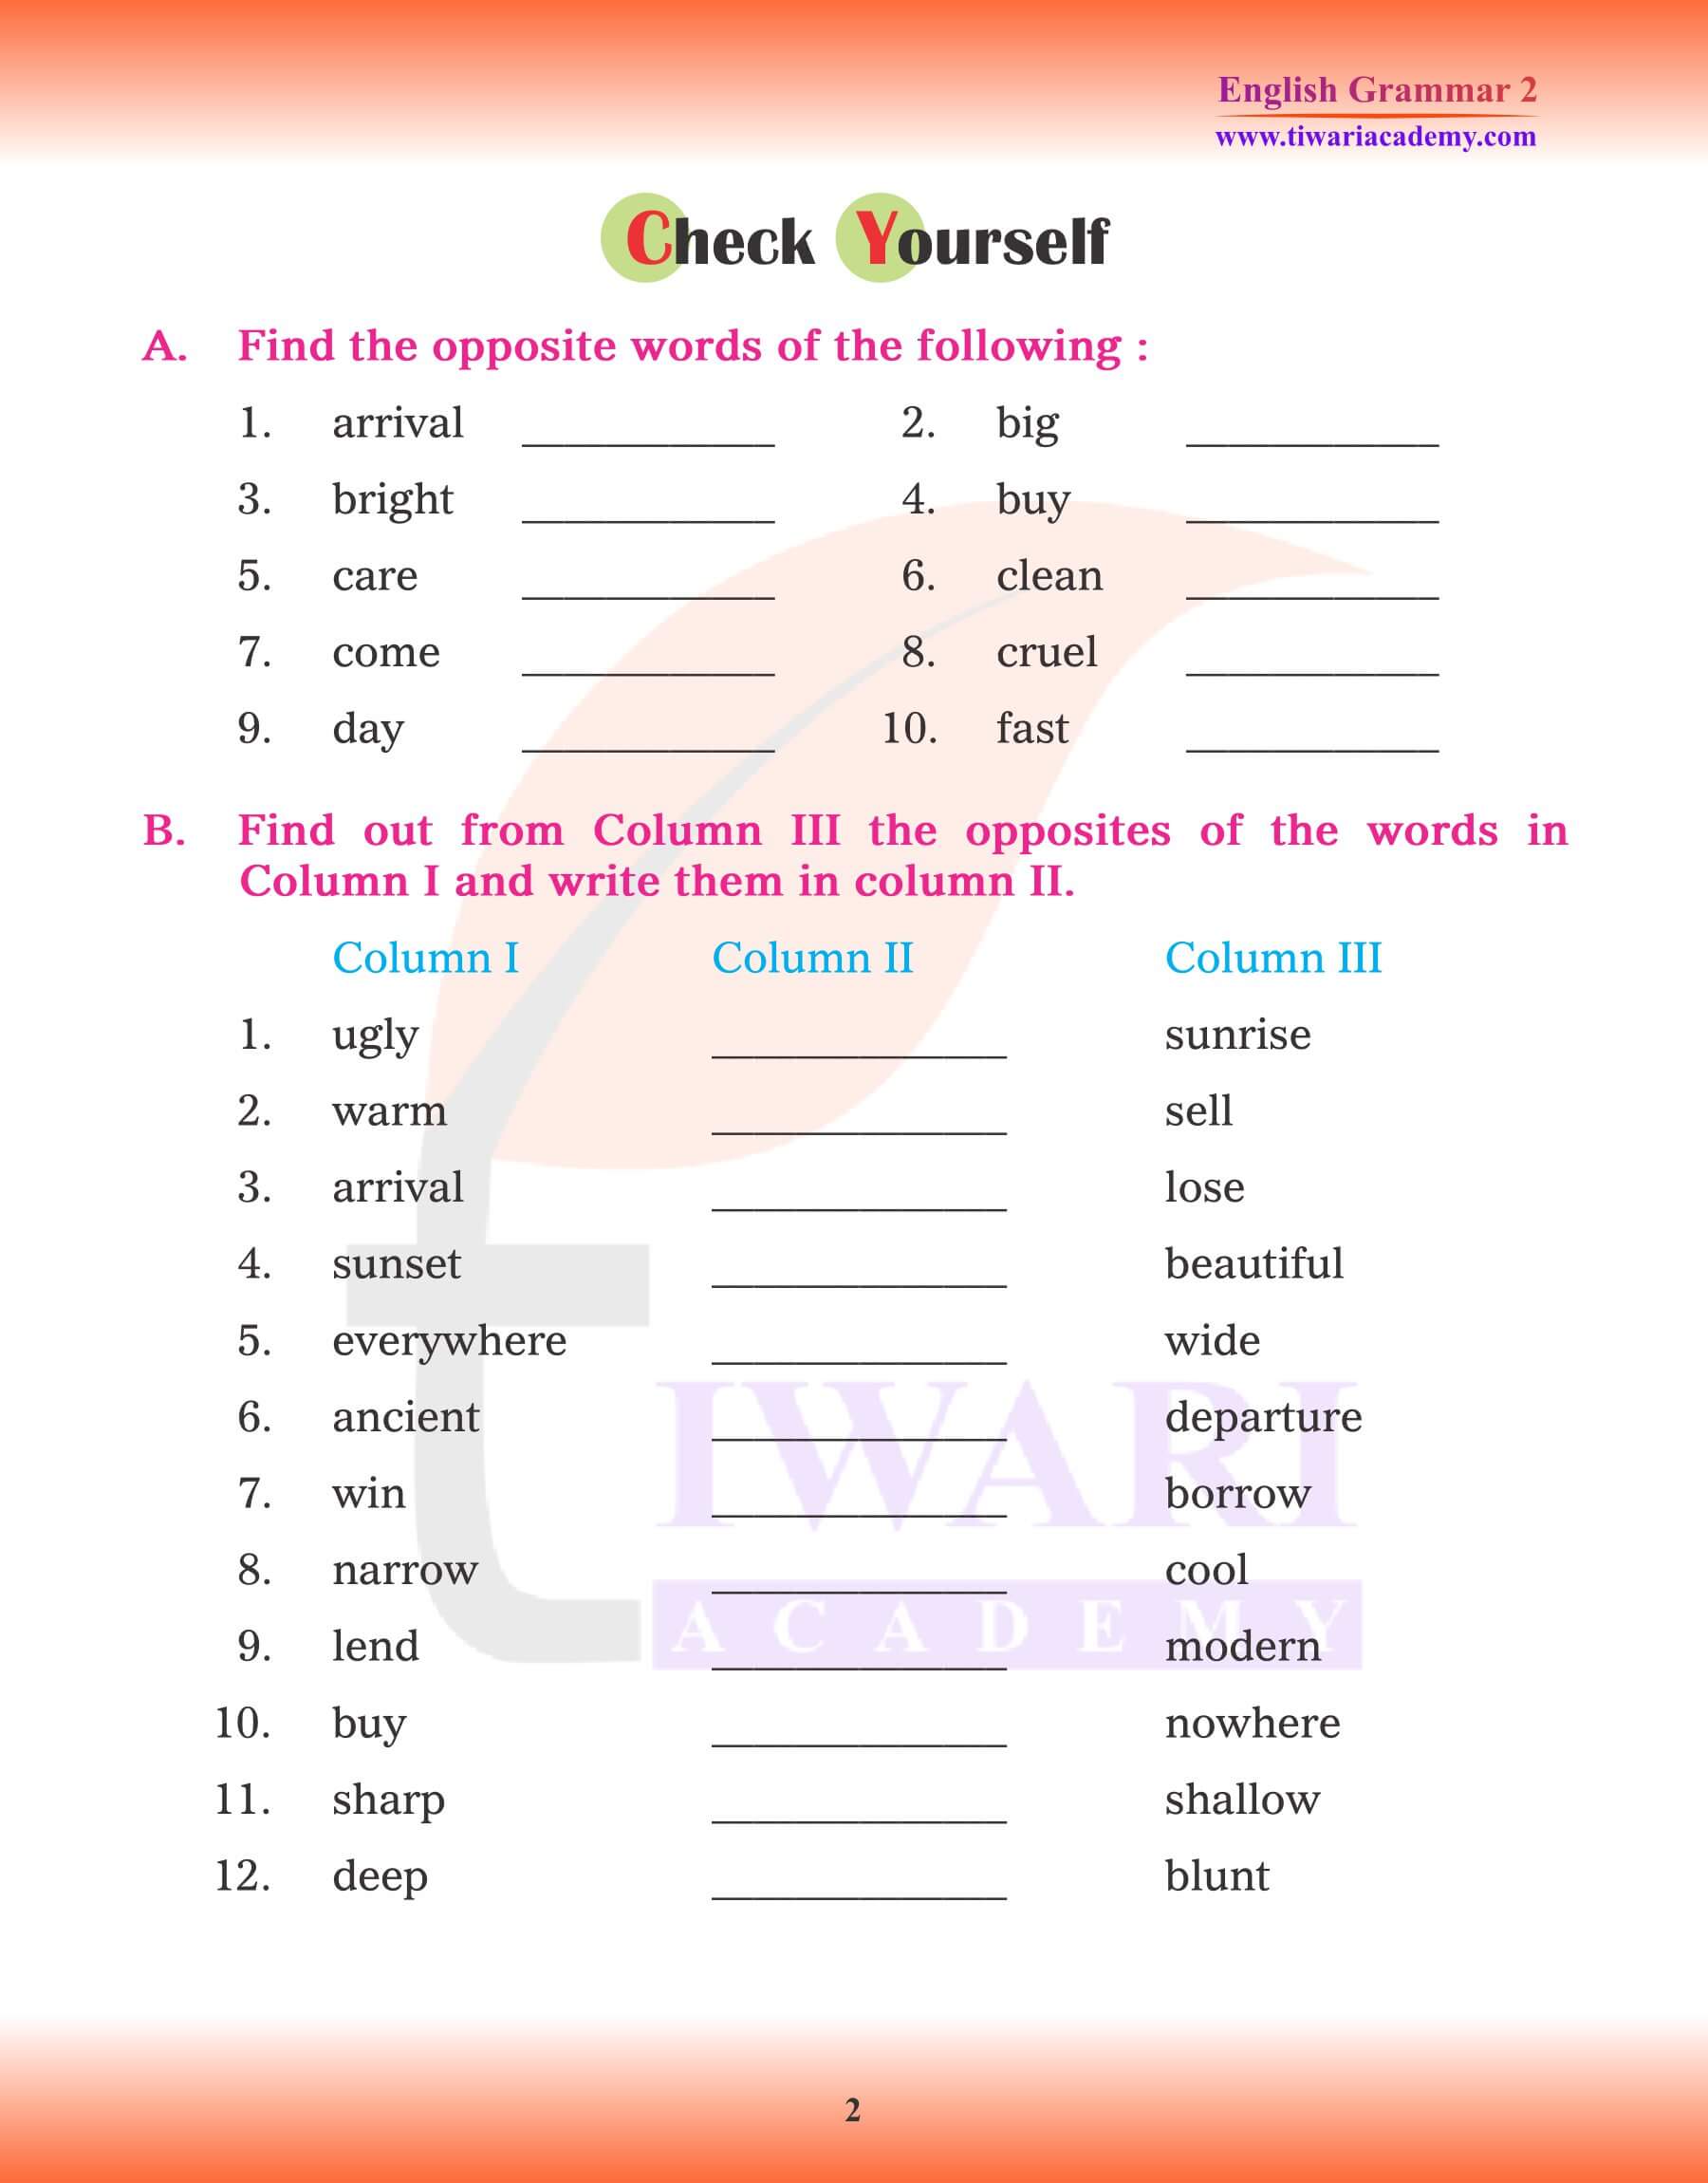 Class 2 English Grammar Examples of Opposite Words